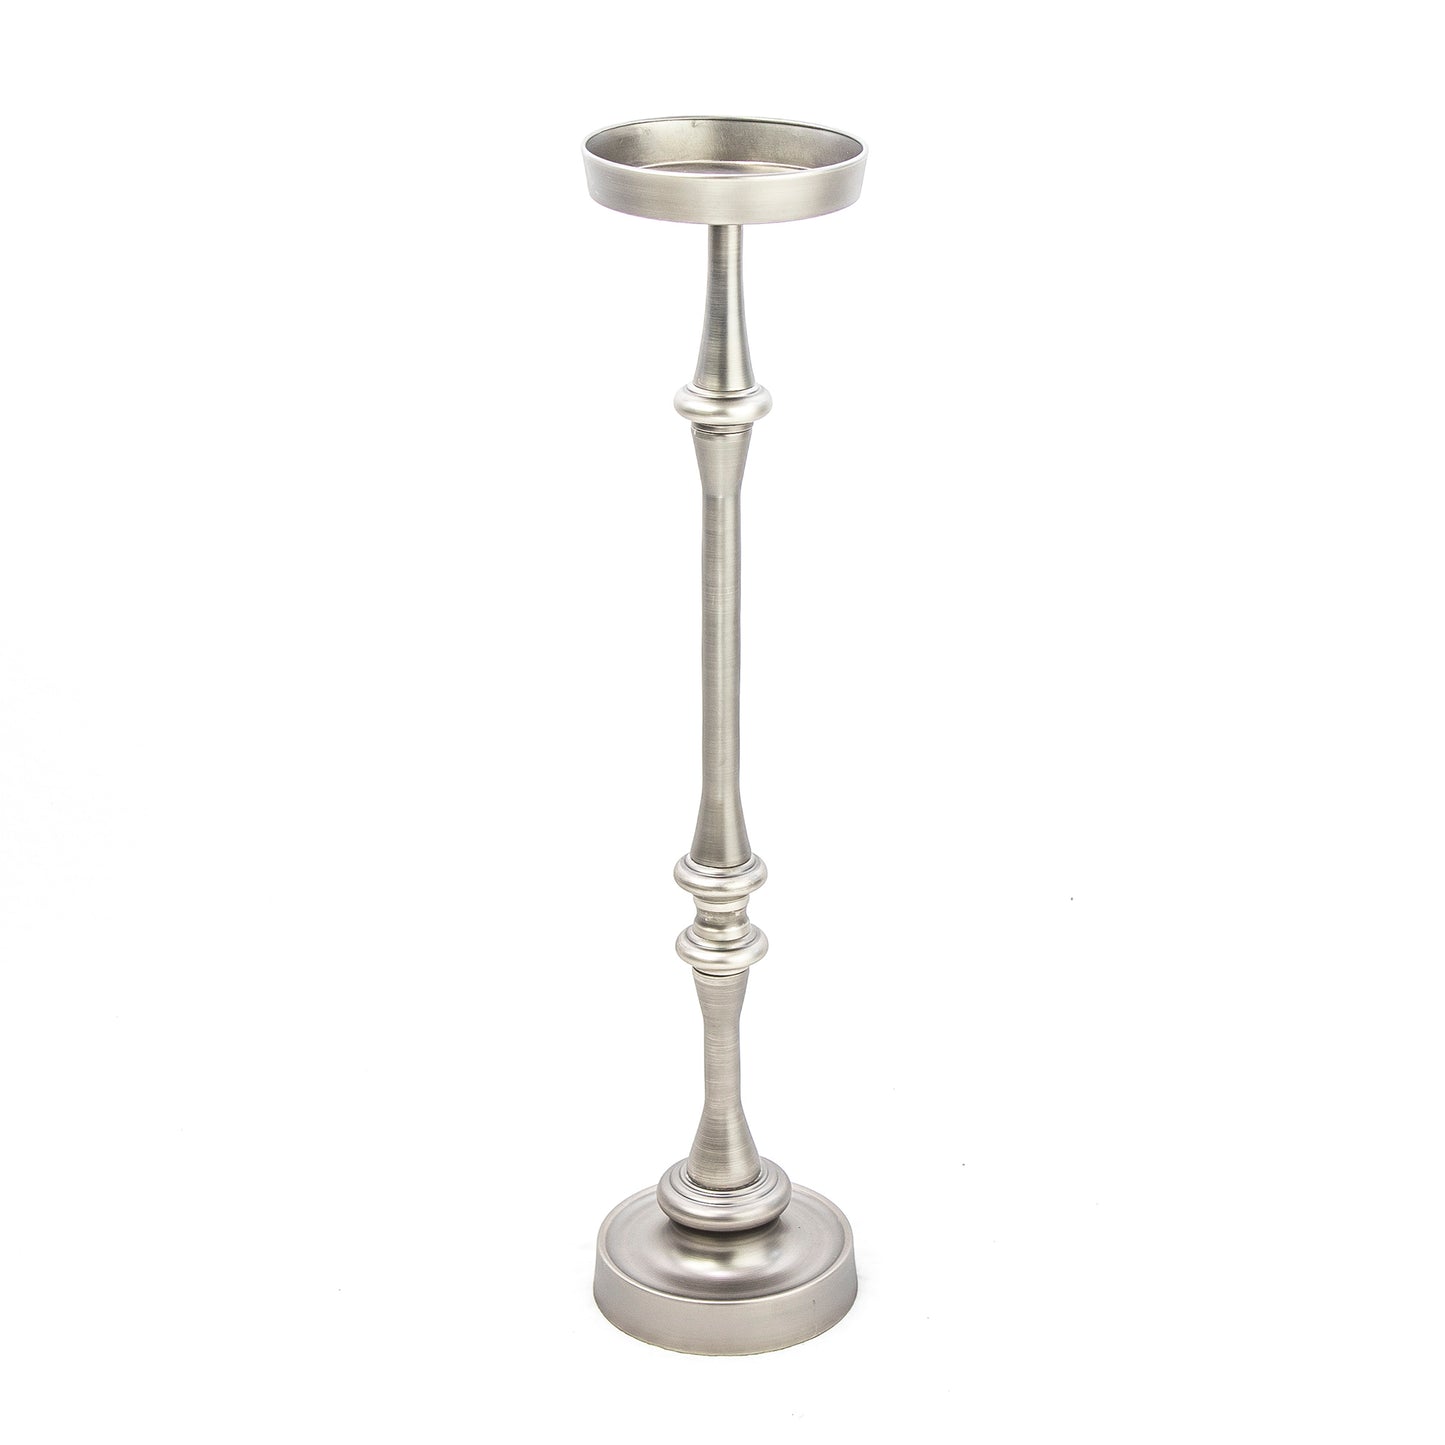 Set of 2 - Martini Side Table in Brushed Silver Finish - New Ridge Home